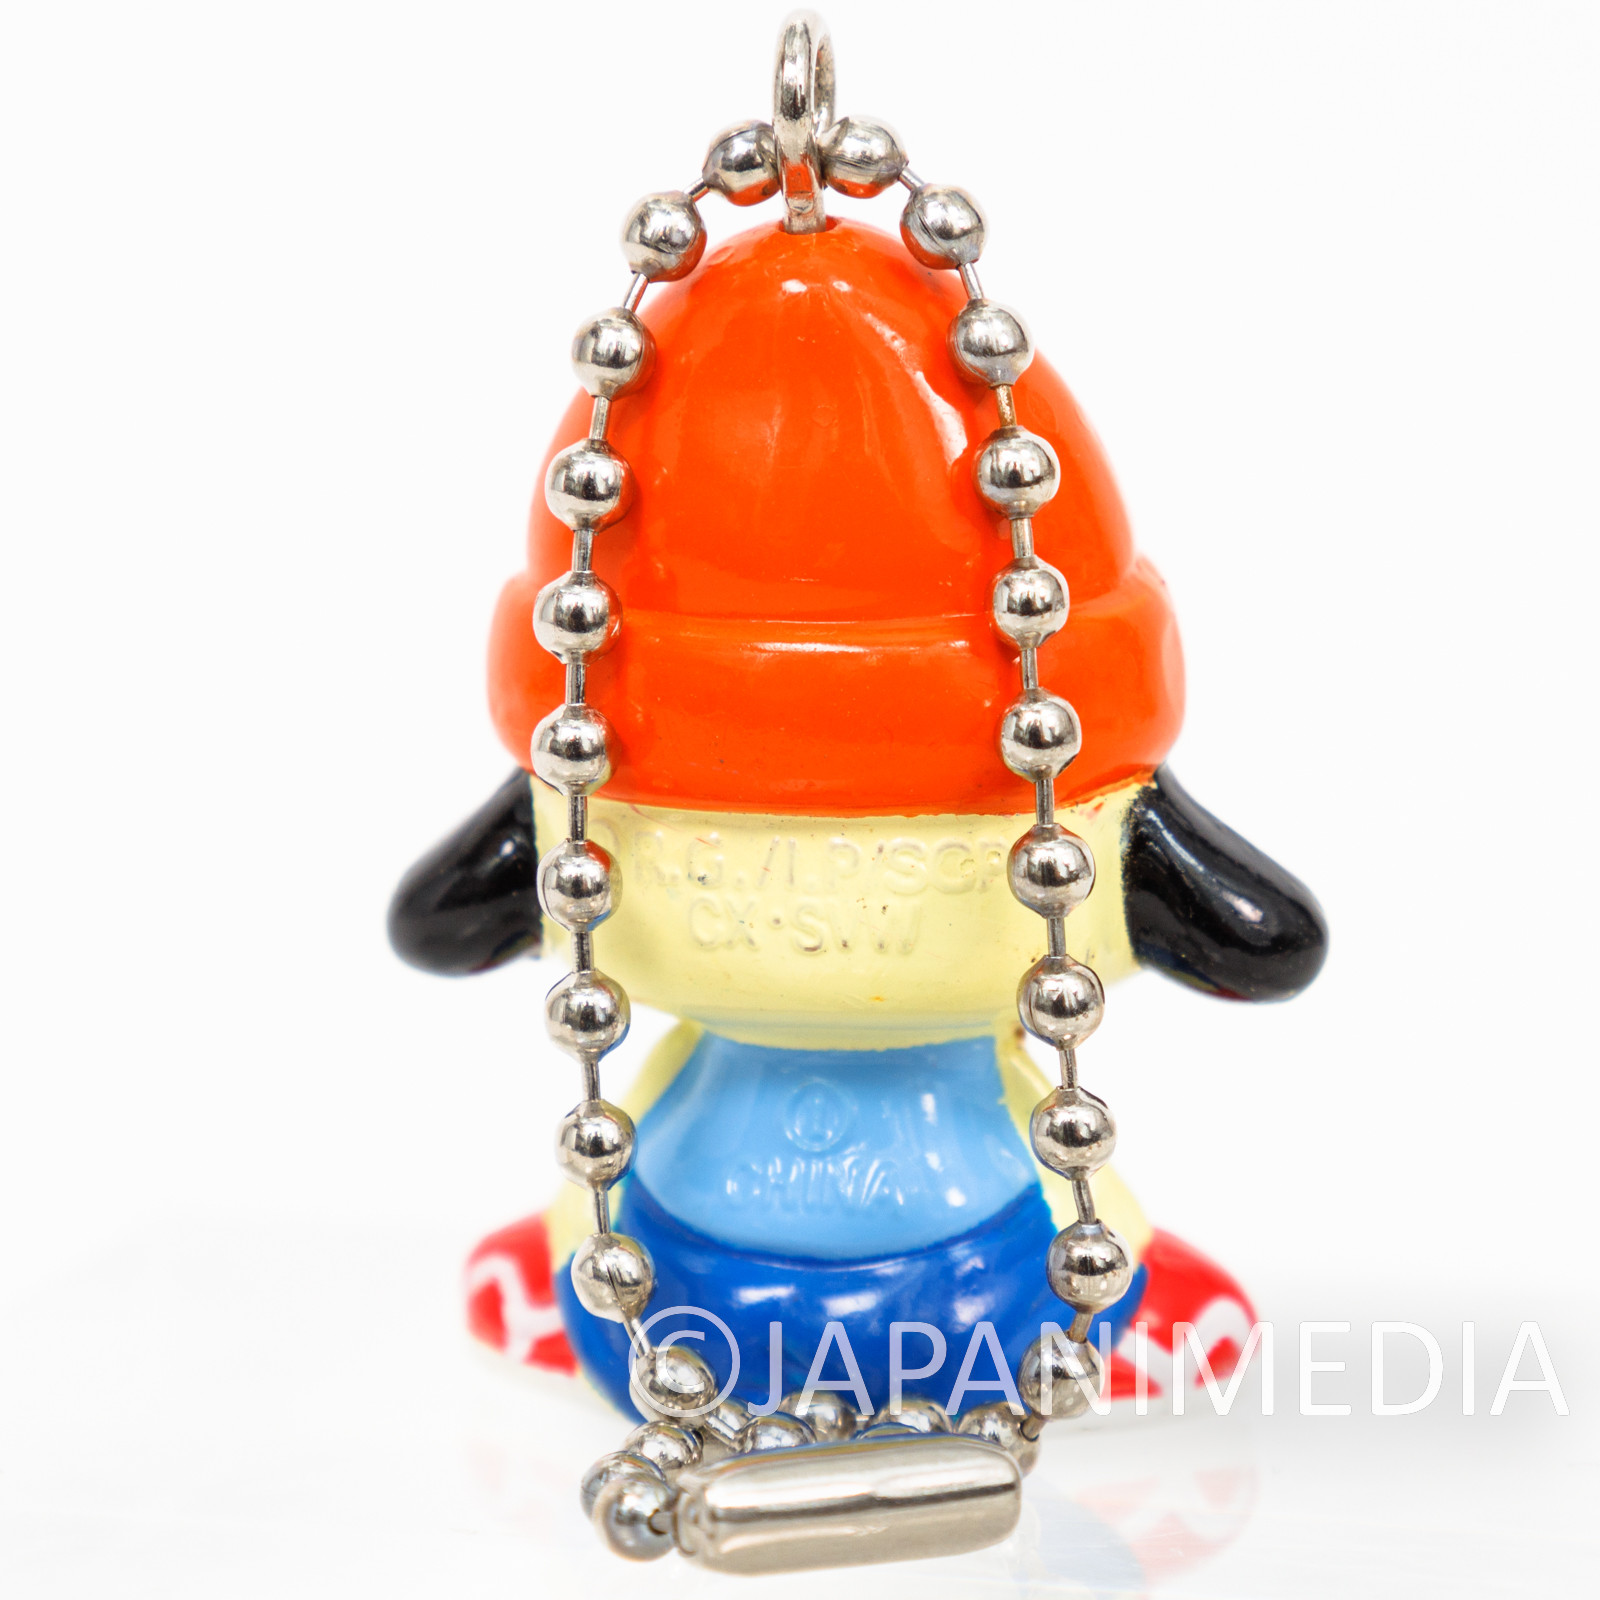 Parappa The Rapper Figure Ball Keychain JAPAN GAME